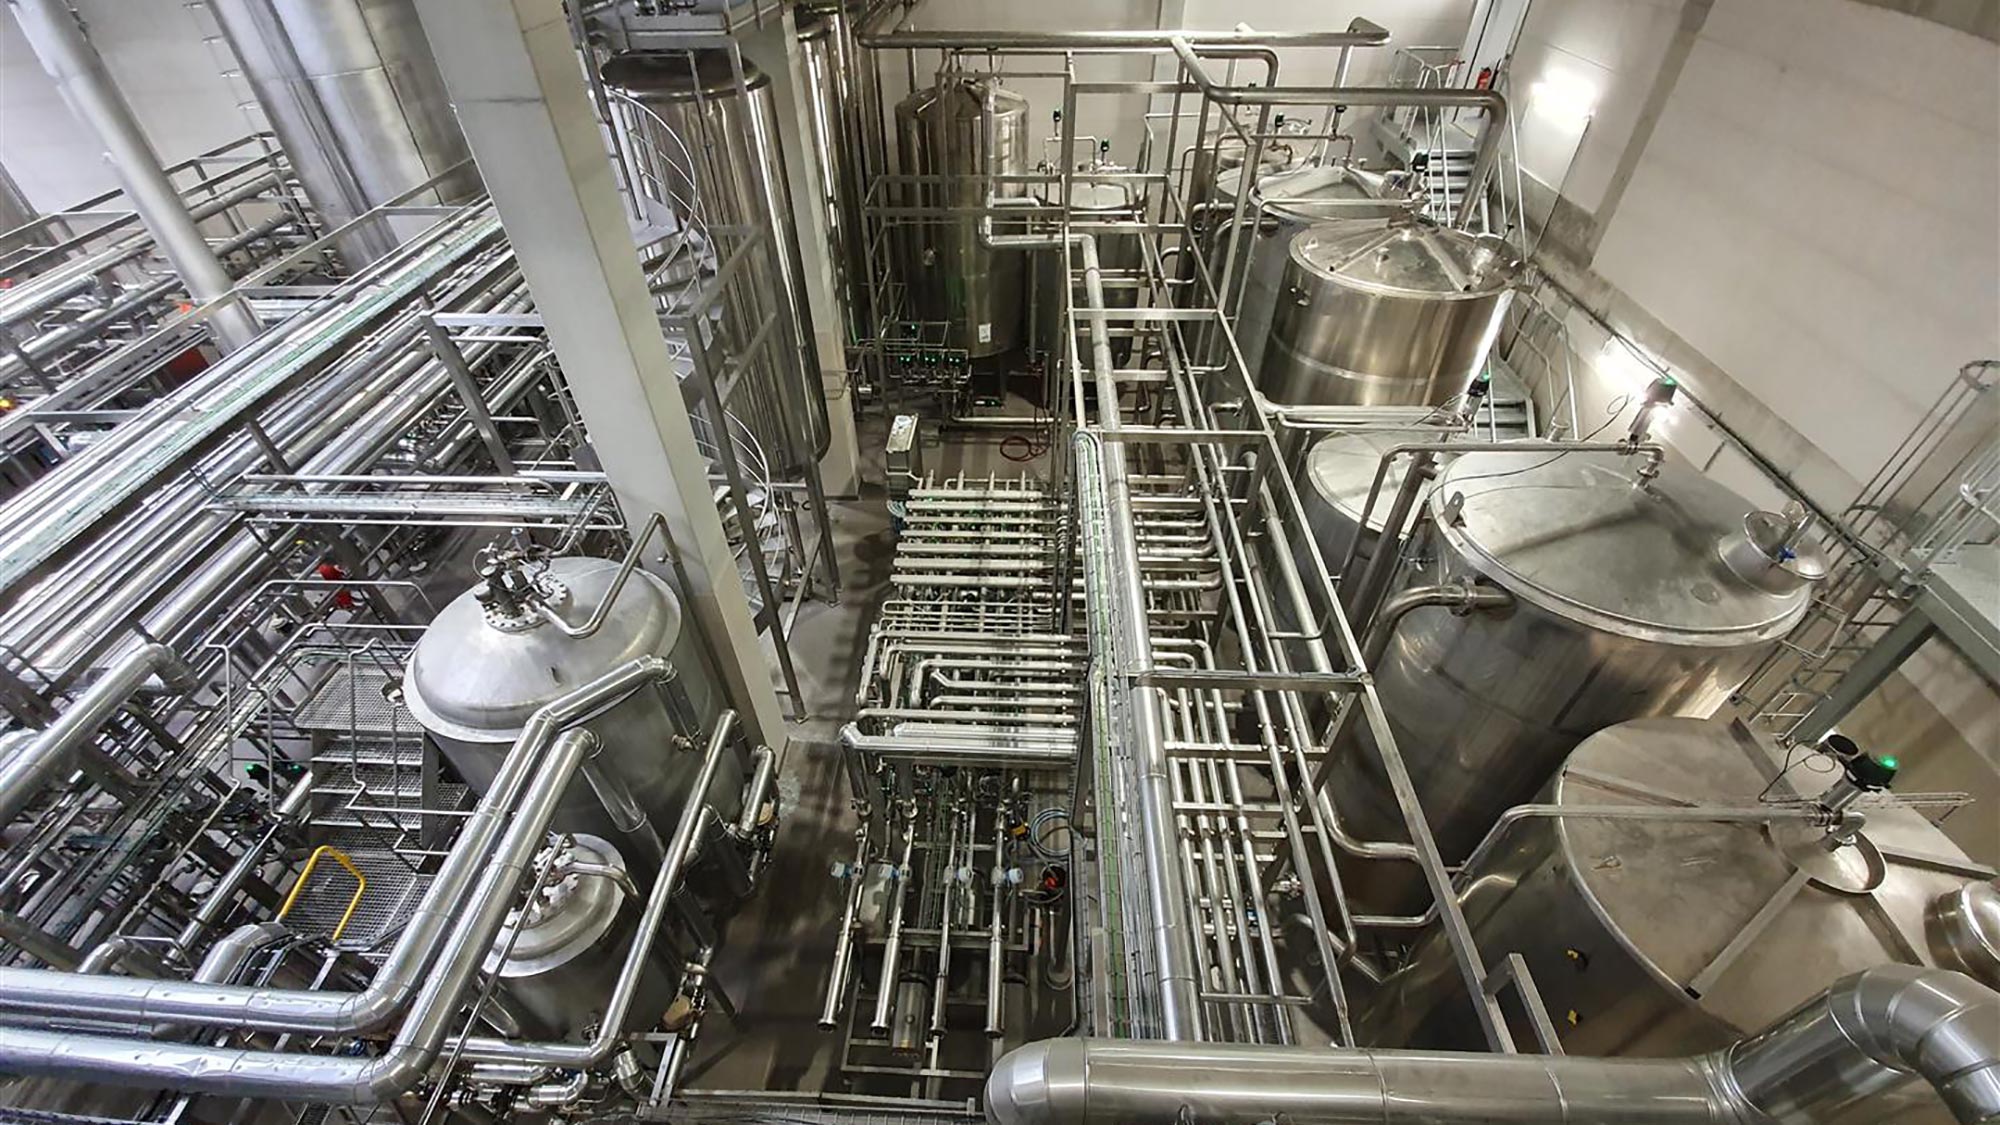 Beer Processing Area – view from pipebridge walkway. This is a complex area with many processes; yeast propagation, fermentation, filtration, and chilling.